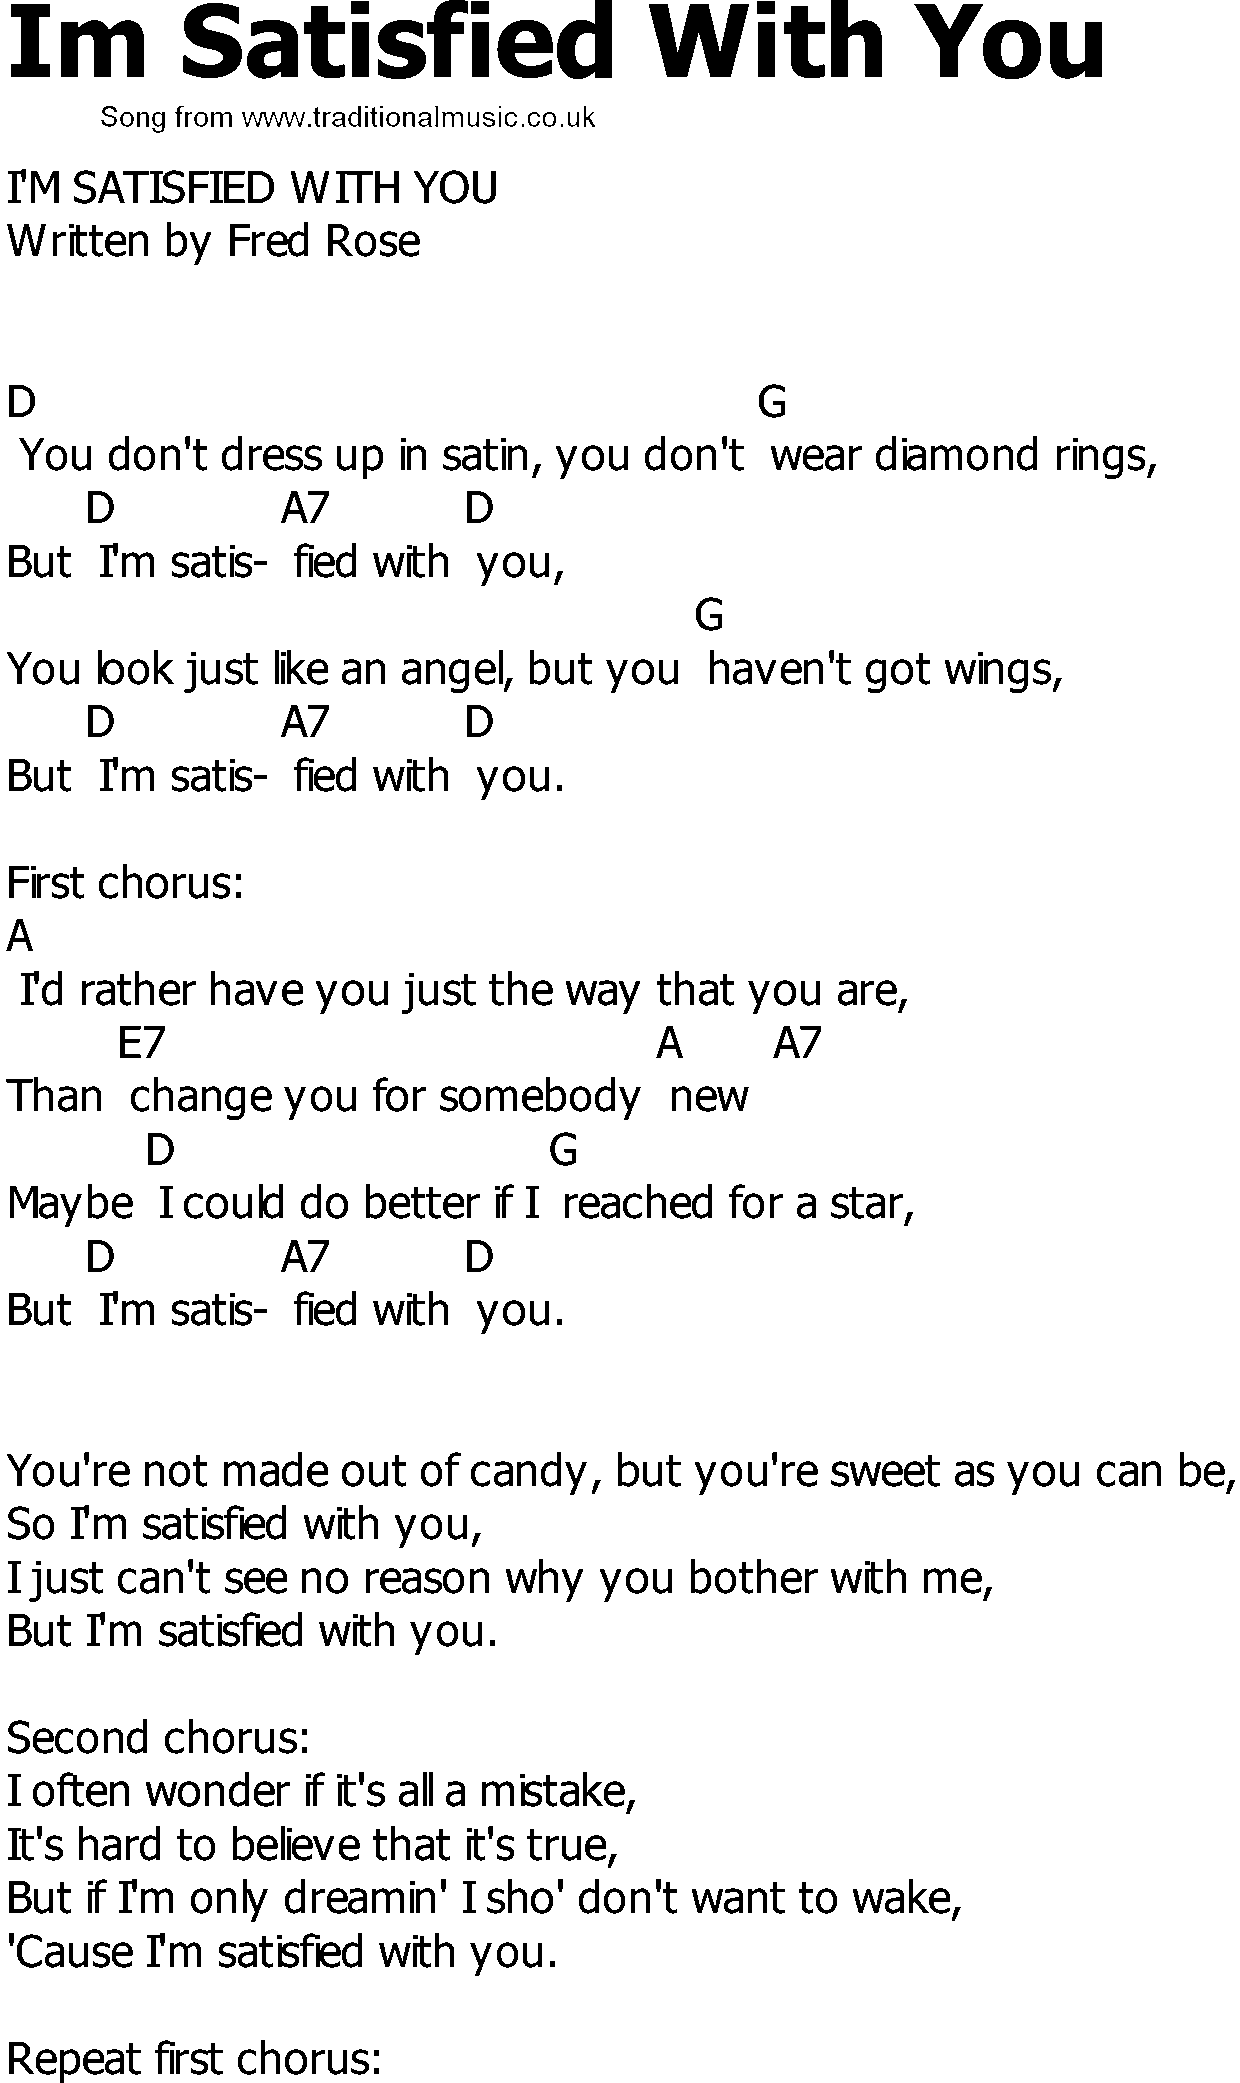 Old Country song lyrics with chords - Im Satisfied With You